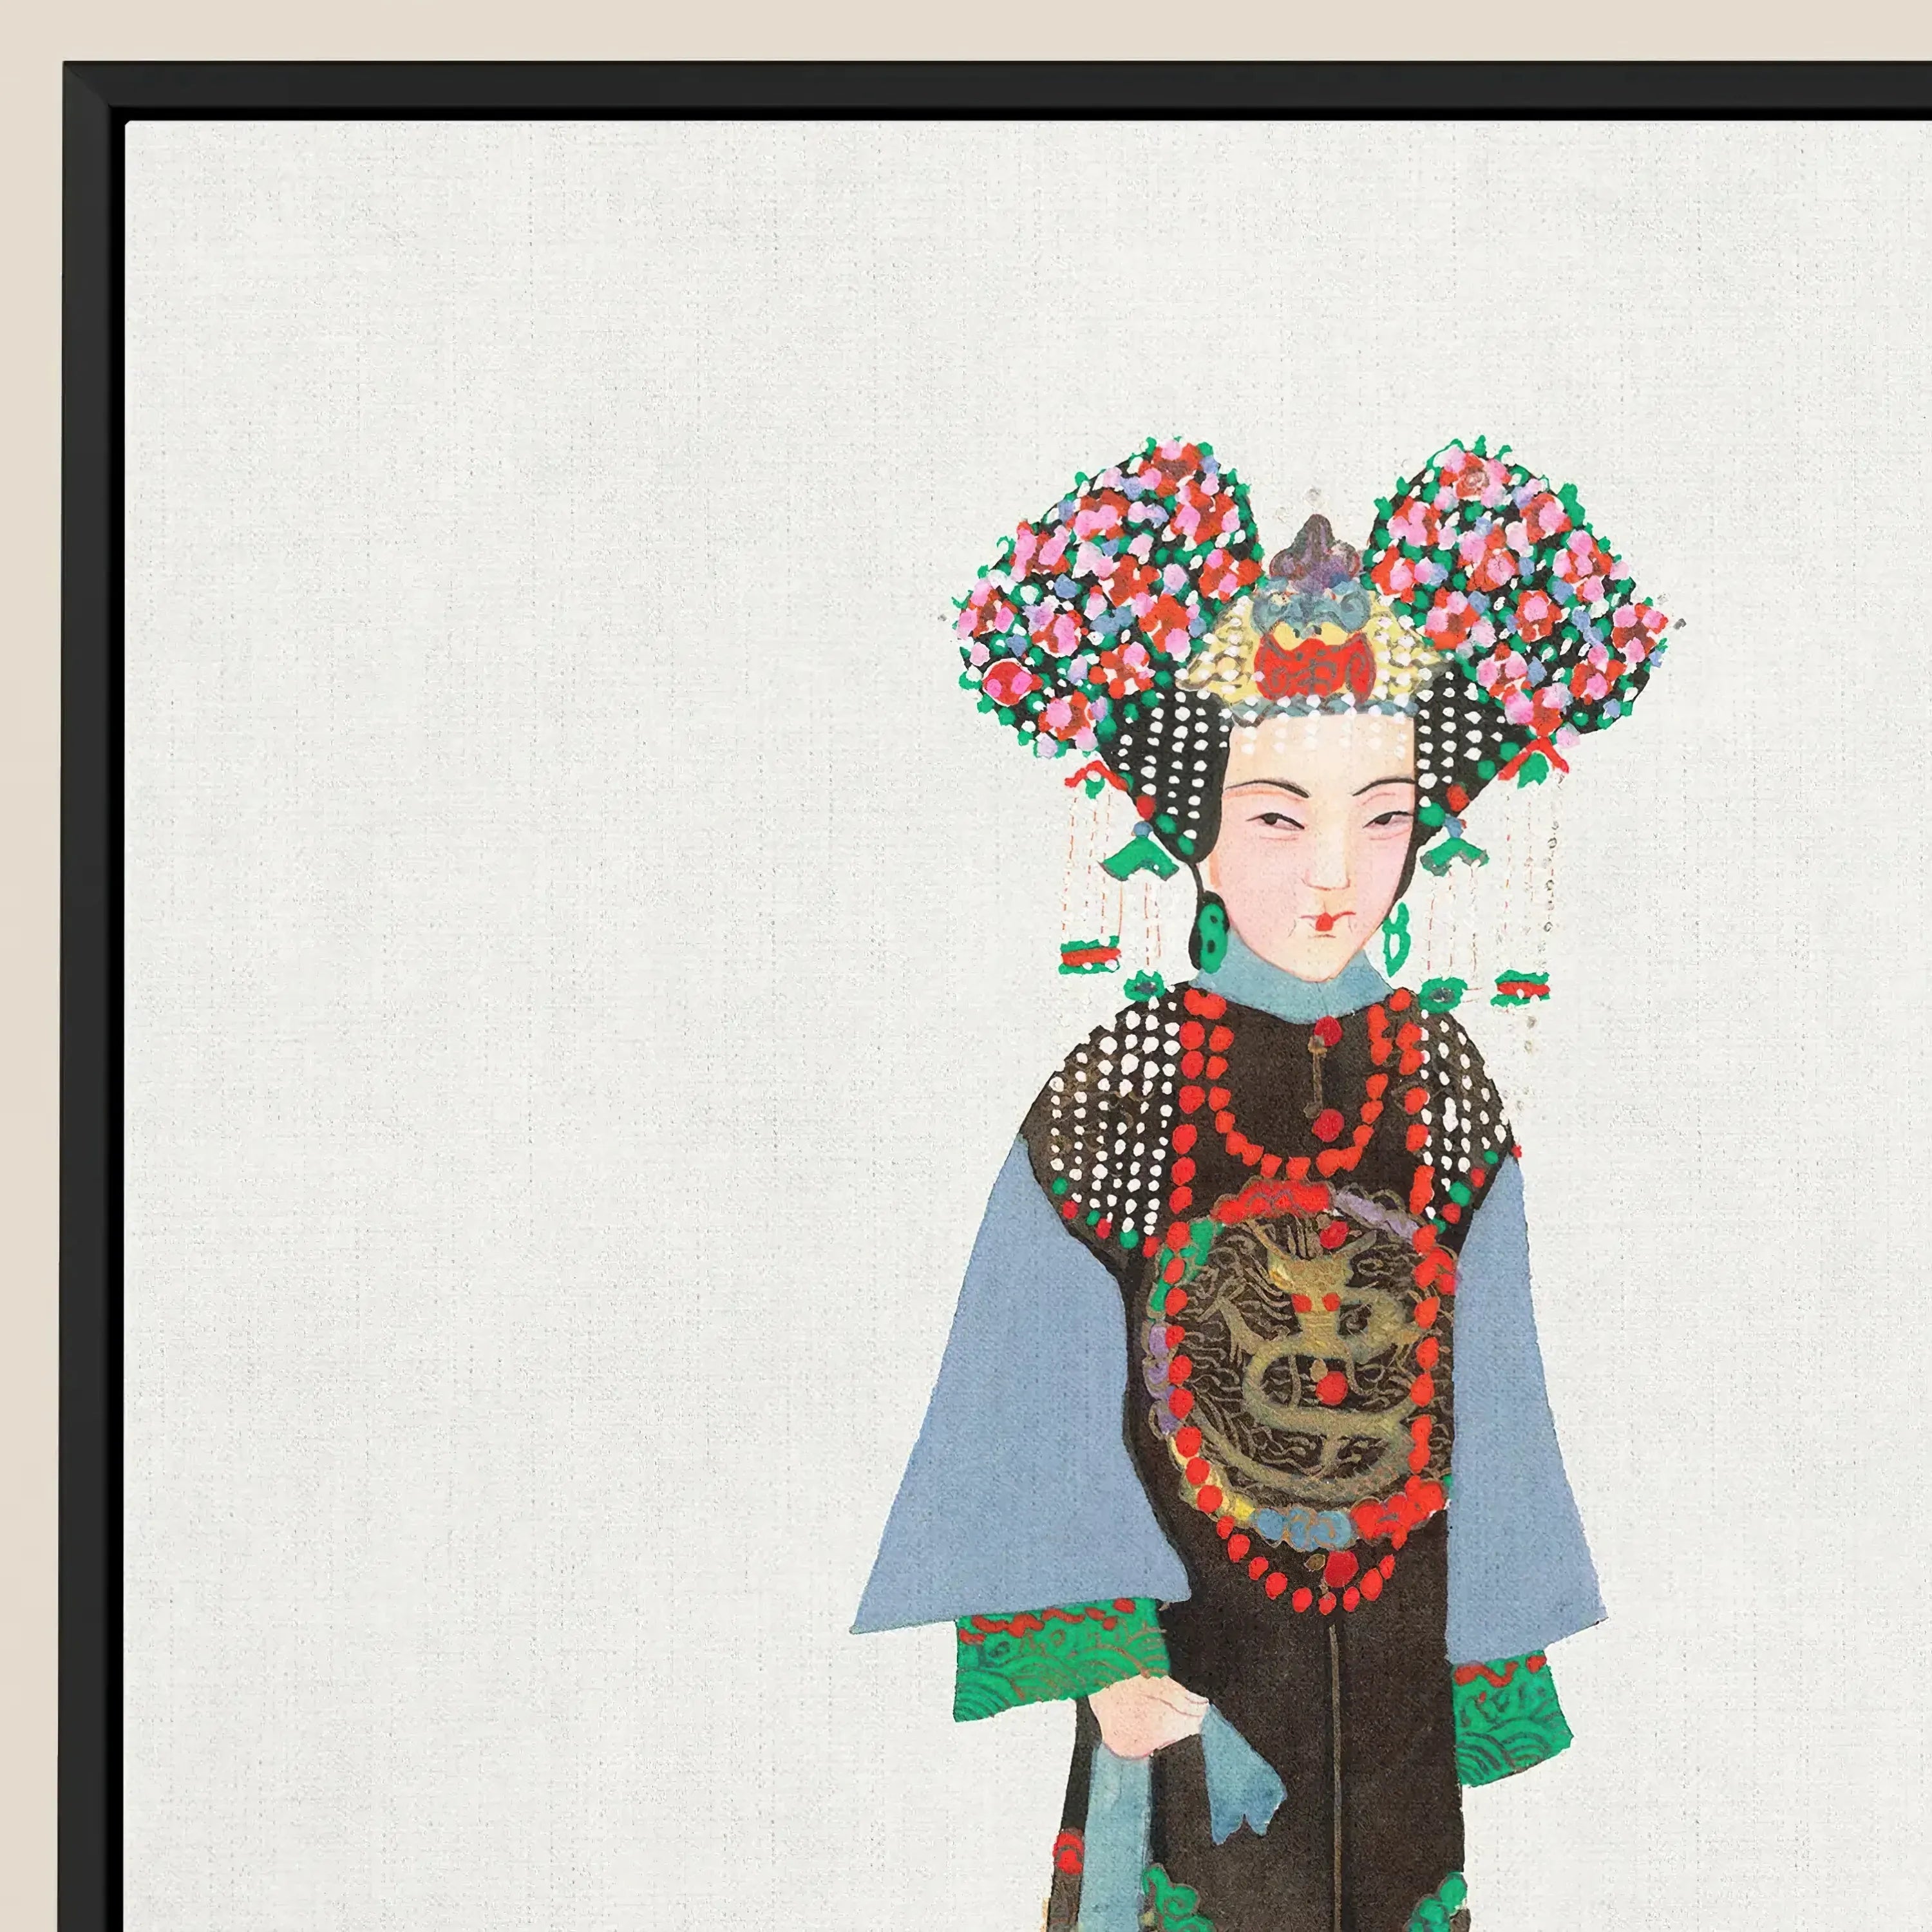 Chinese Empress - Framed Canvas - Posters Prints & Visual Artwork - Aesthetic Art